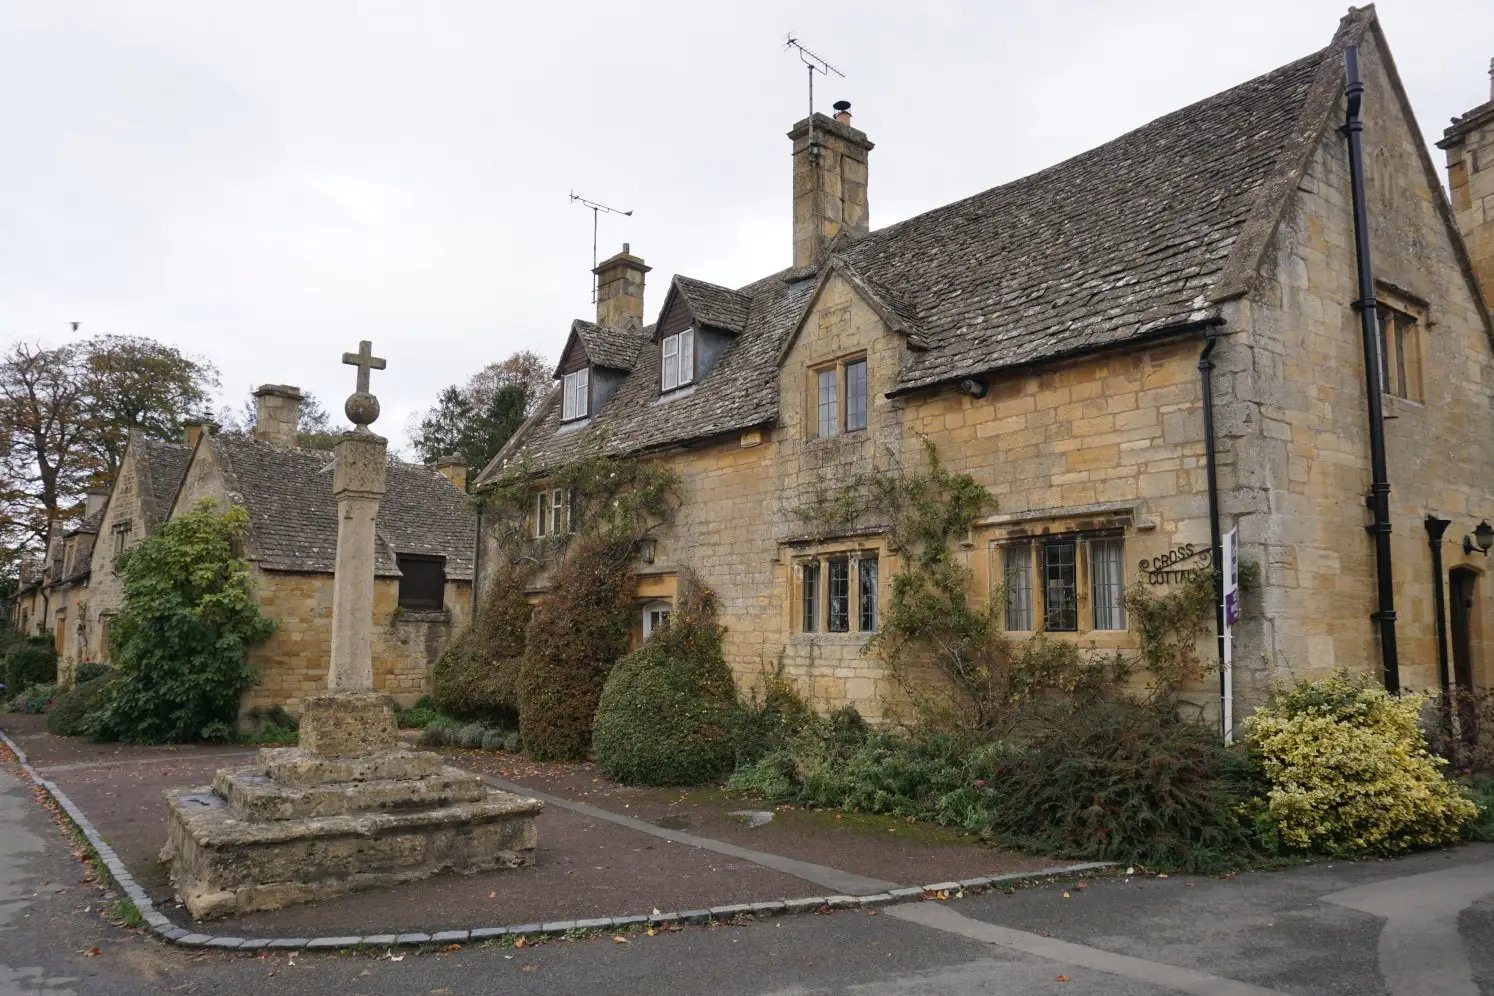 Beautiful Cotswold cottages in the village of Stanton - Travelling around the Cotswolds without a car